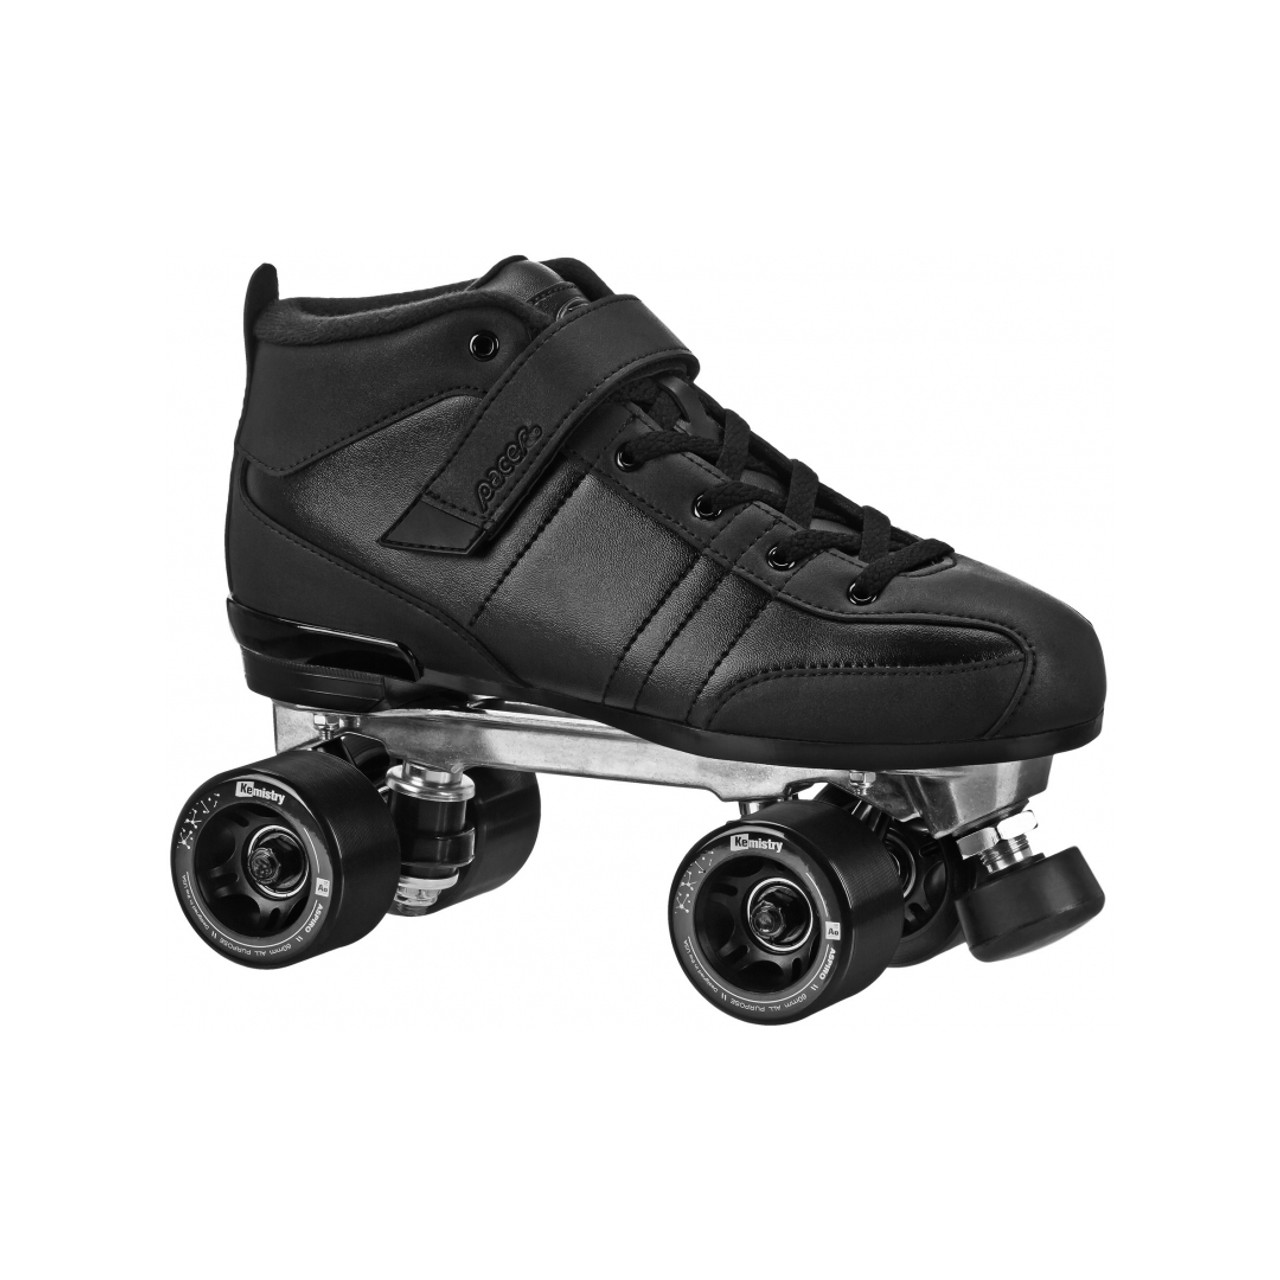 New Astro Nuts Roller Derby Roller Skating FREE SHIPPING 